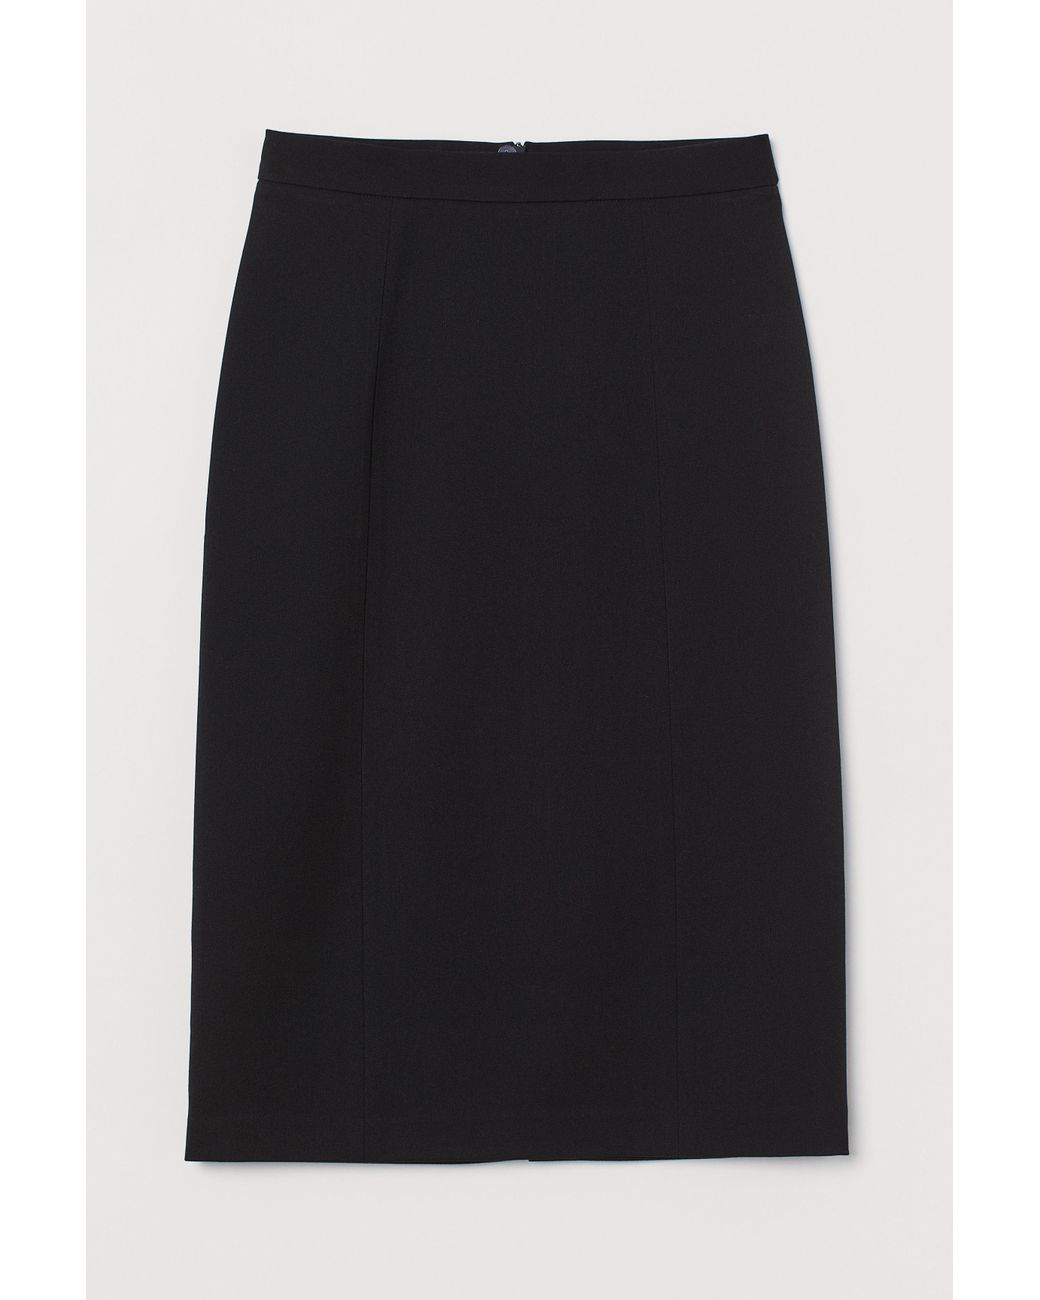 H&M Synthetic Knee-length Pencil Skirt in Black - Lyst